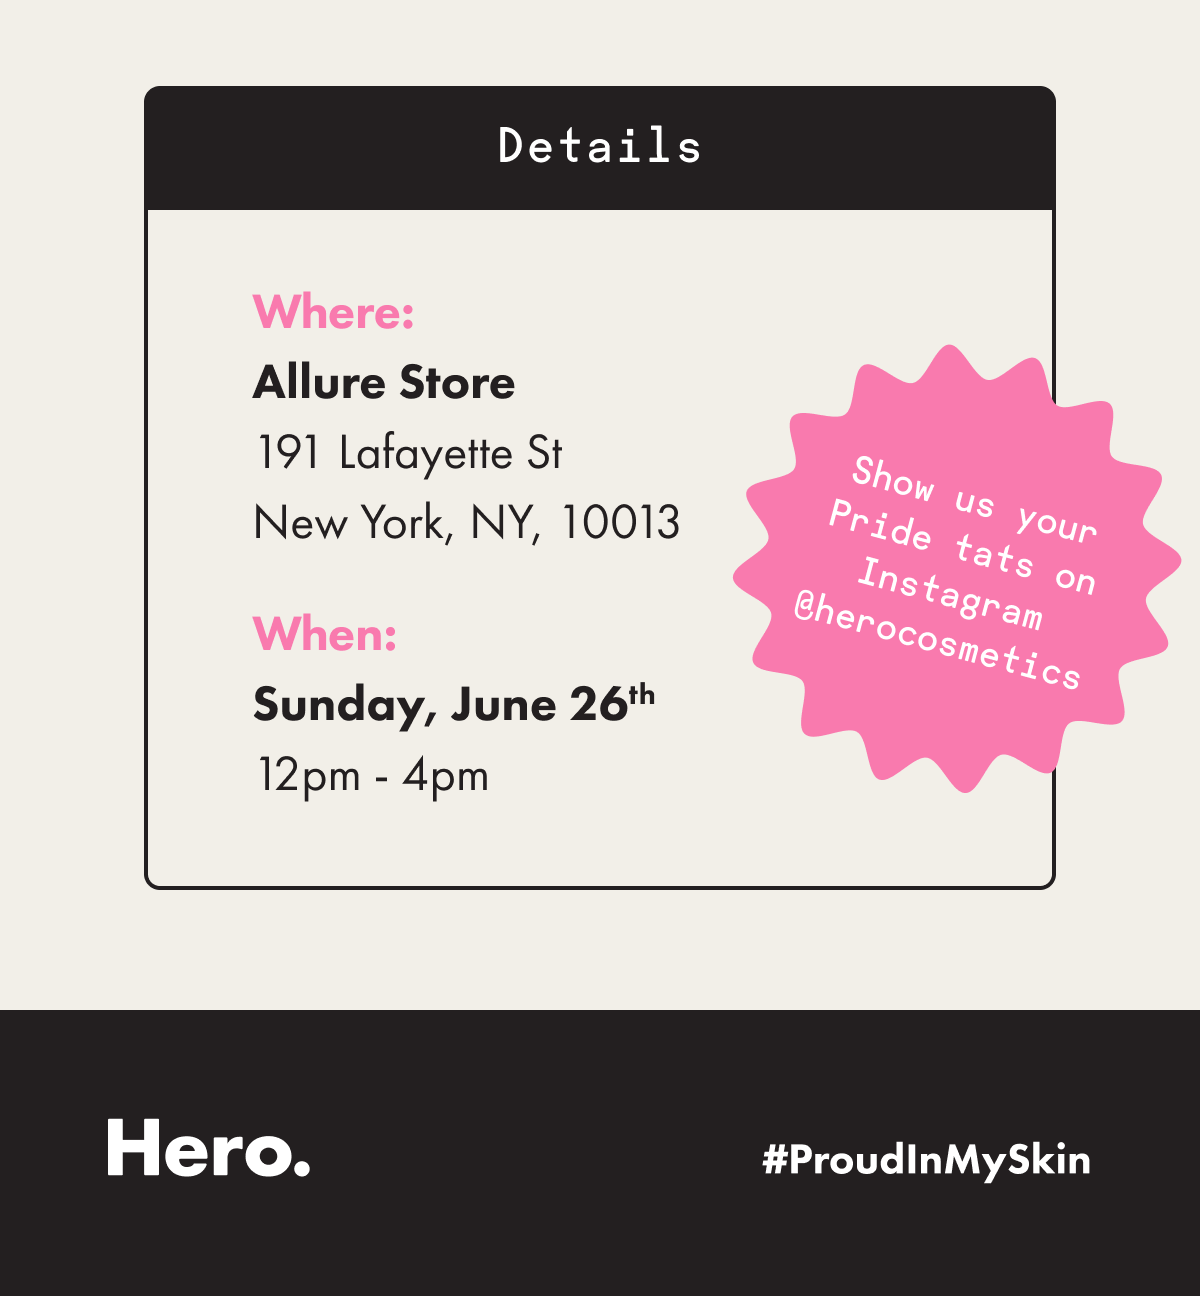 Details. Where: Allure Store on 191 lafayette street new york, ny 10013. When: Sunday, June 26th 12PM-4PM. Show us your pride tats on instagram! @herocosmetics